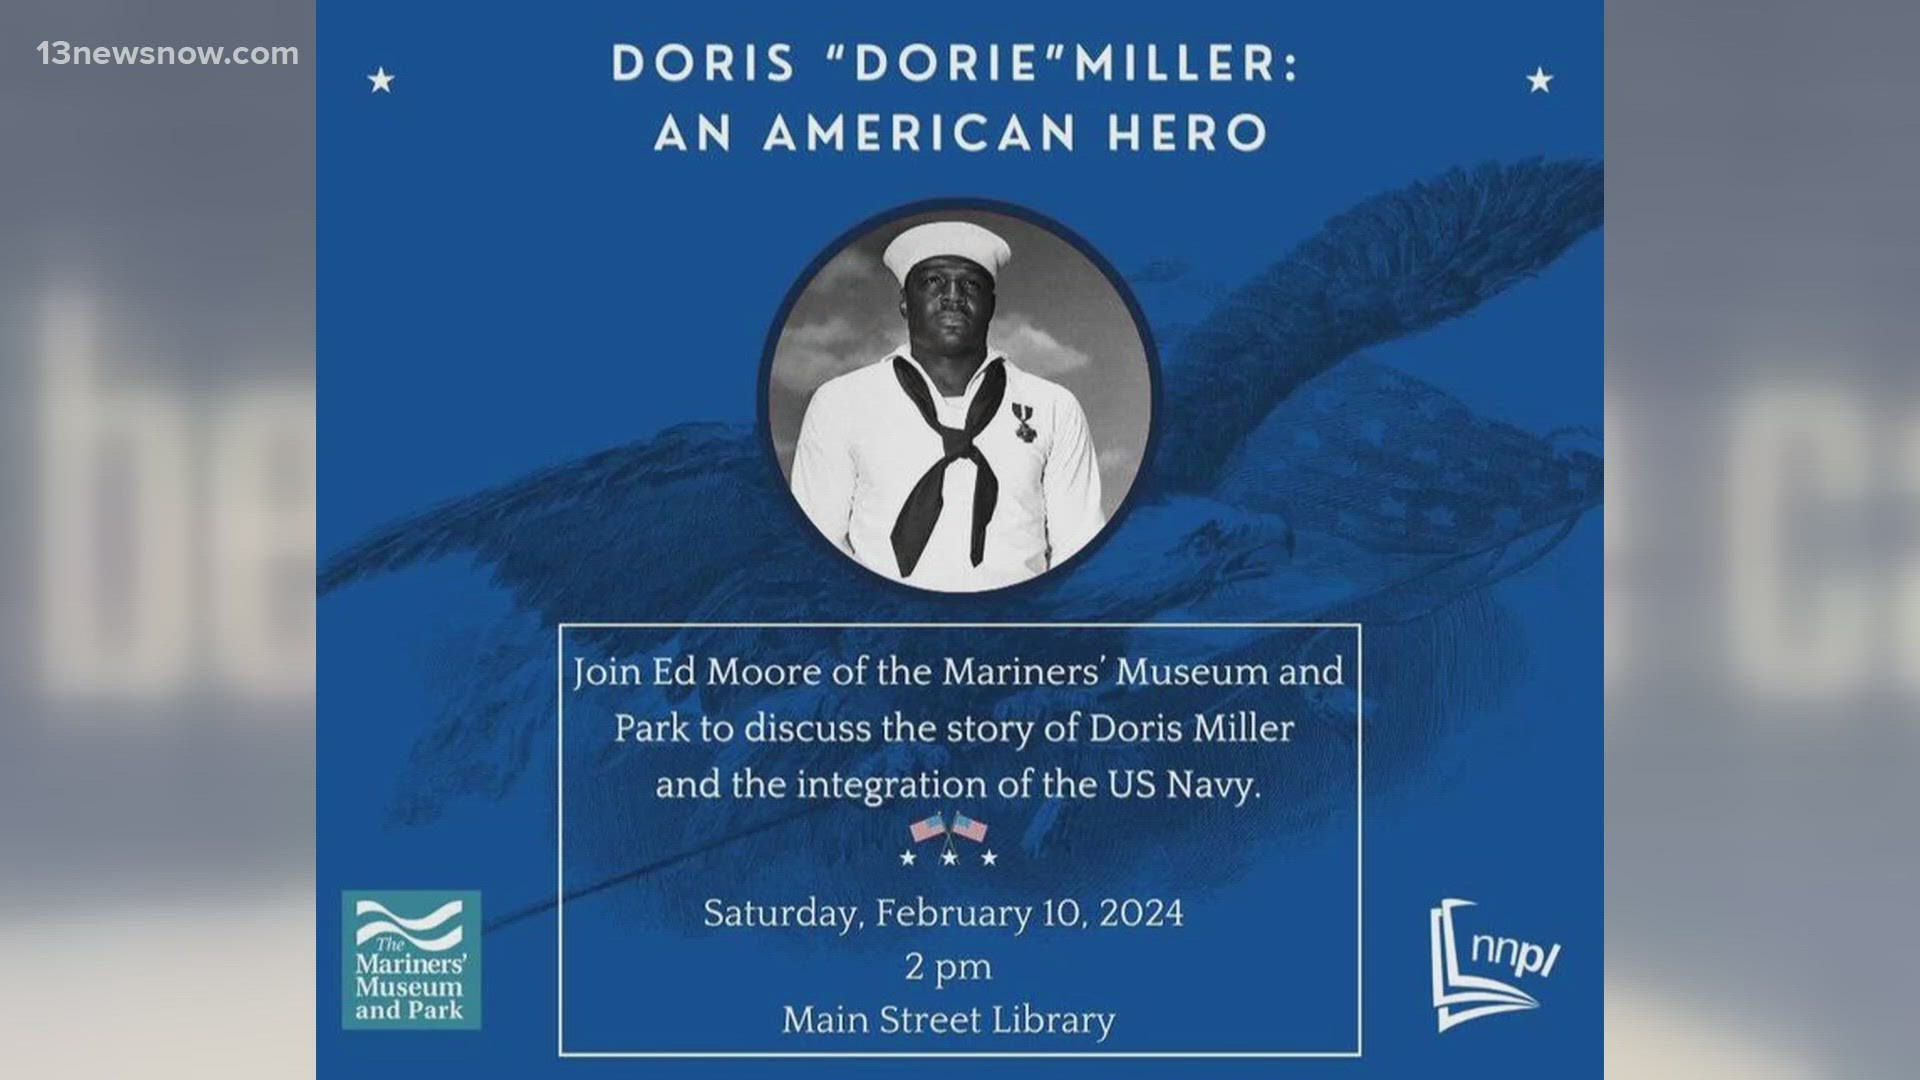 Black WWII hero to be honored at Mariner's Museum February 10.